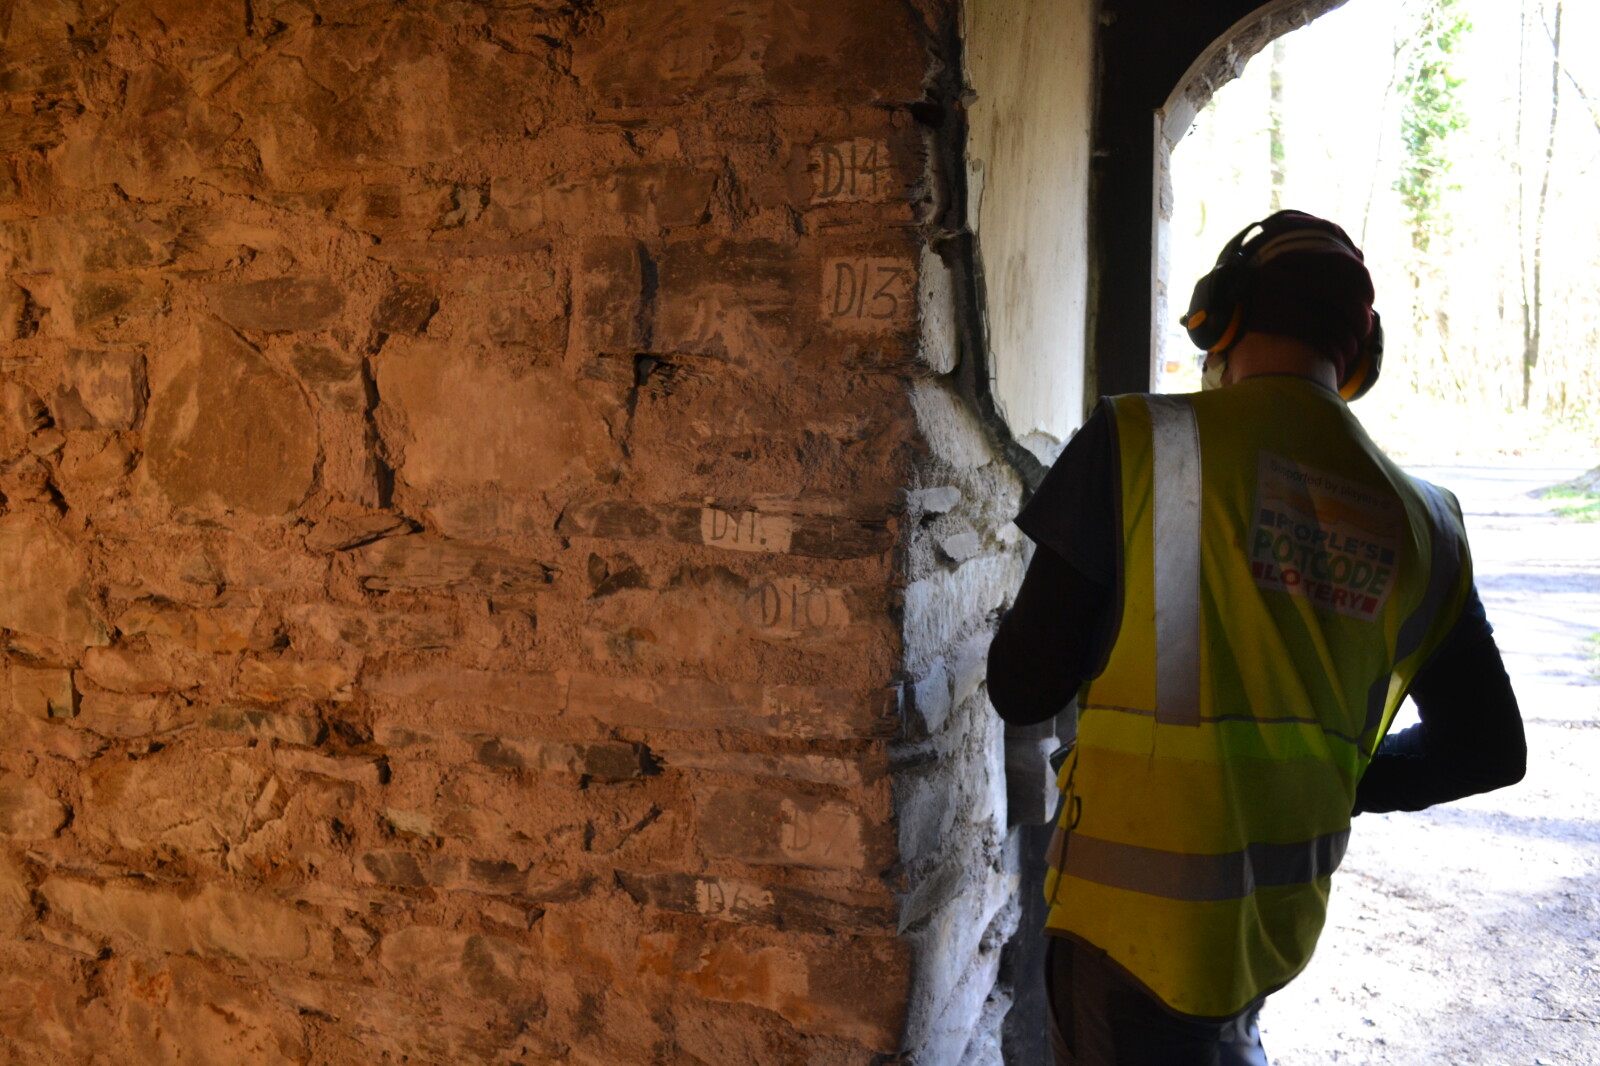 Workman next to a newly stripped stone wall revealing numbered cornerstones.